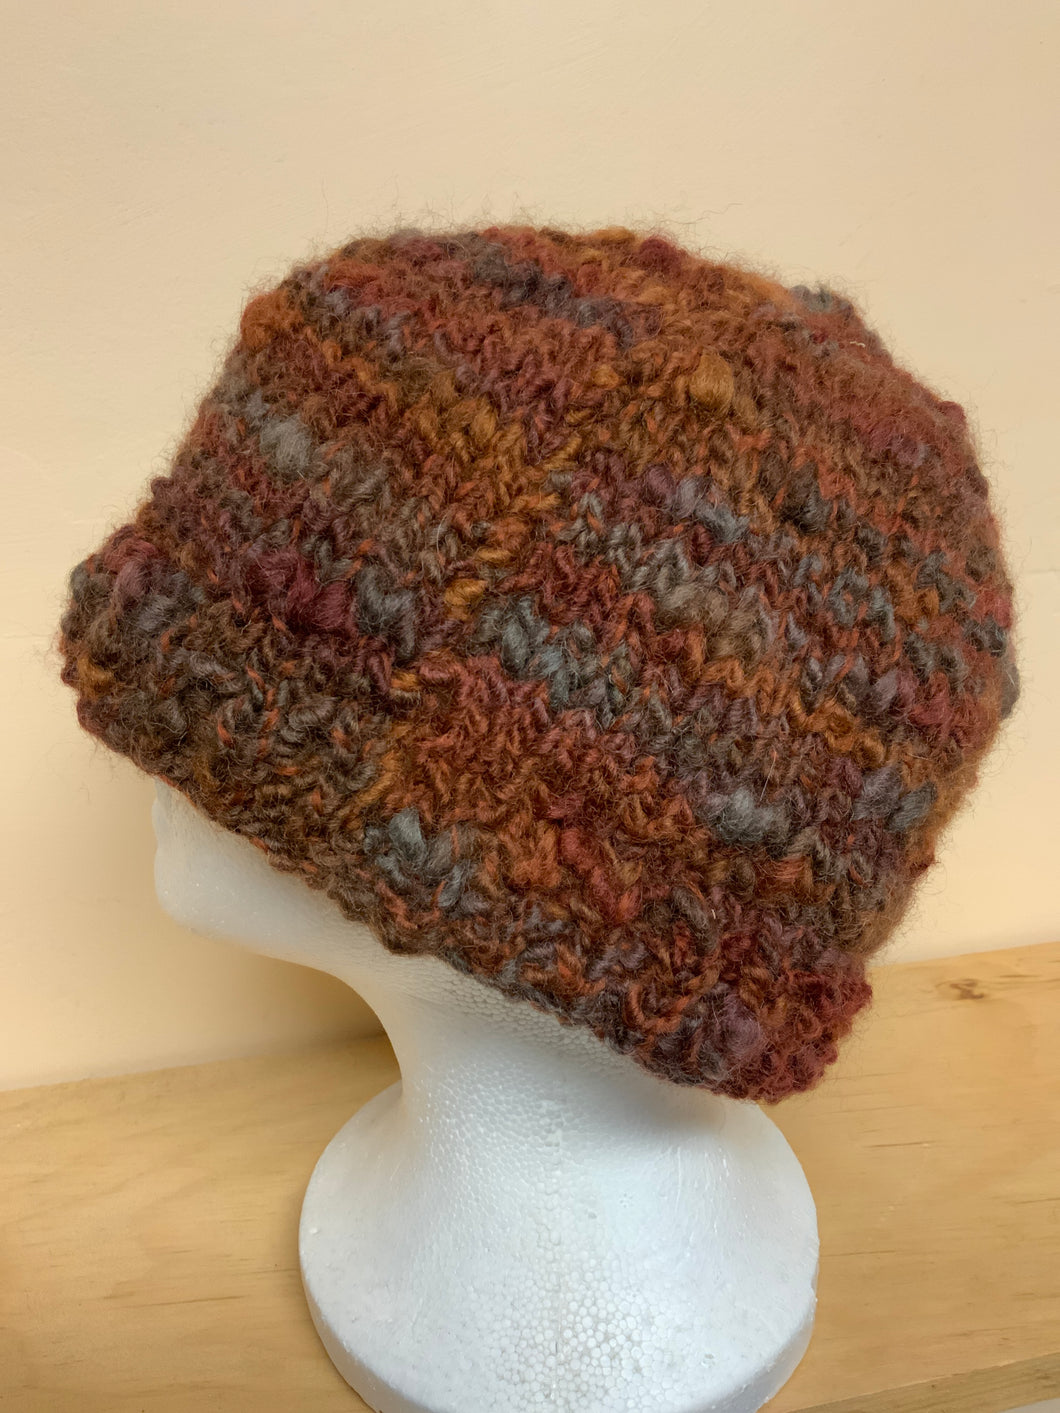 Hand-knit wool hat in shades of brown